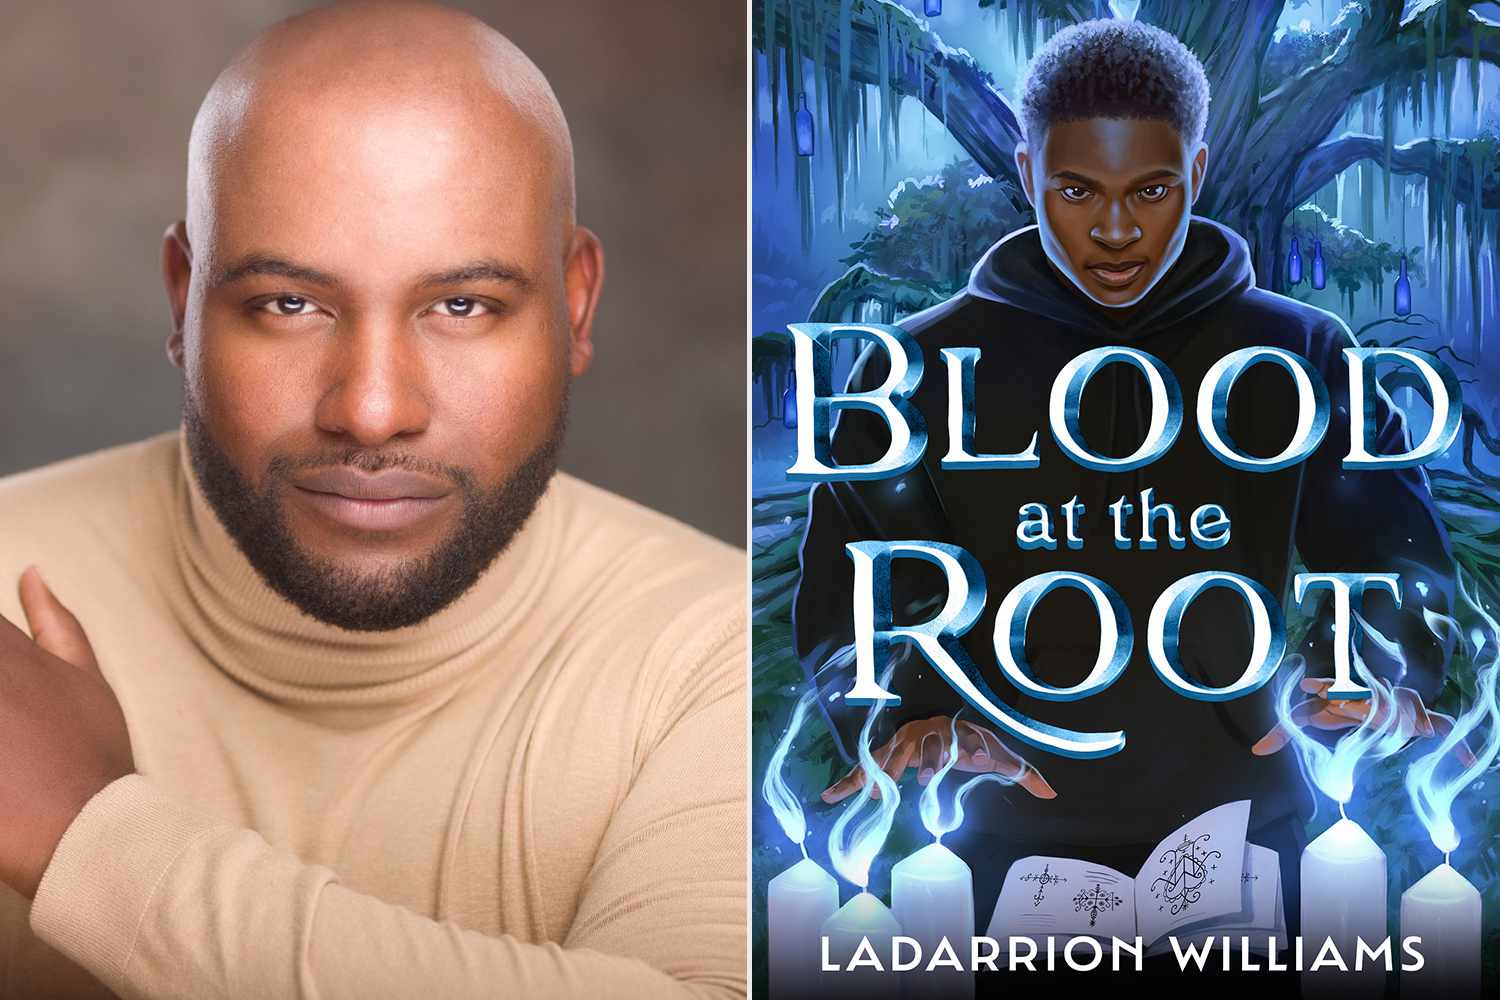 ladarrion williams brings magical education to an hbcu in “blood at the root”: 'i'm excited for black boys to see themselves' (exclusive)